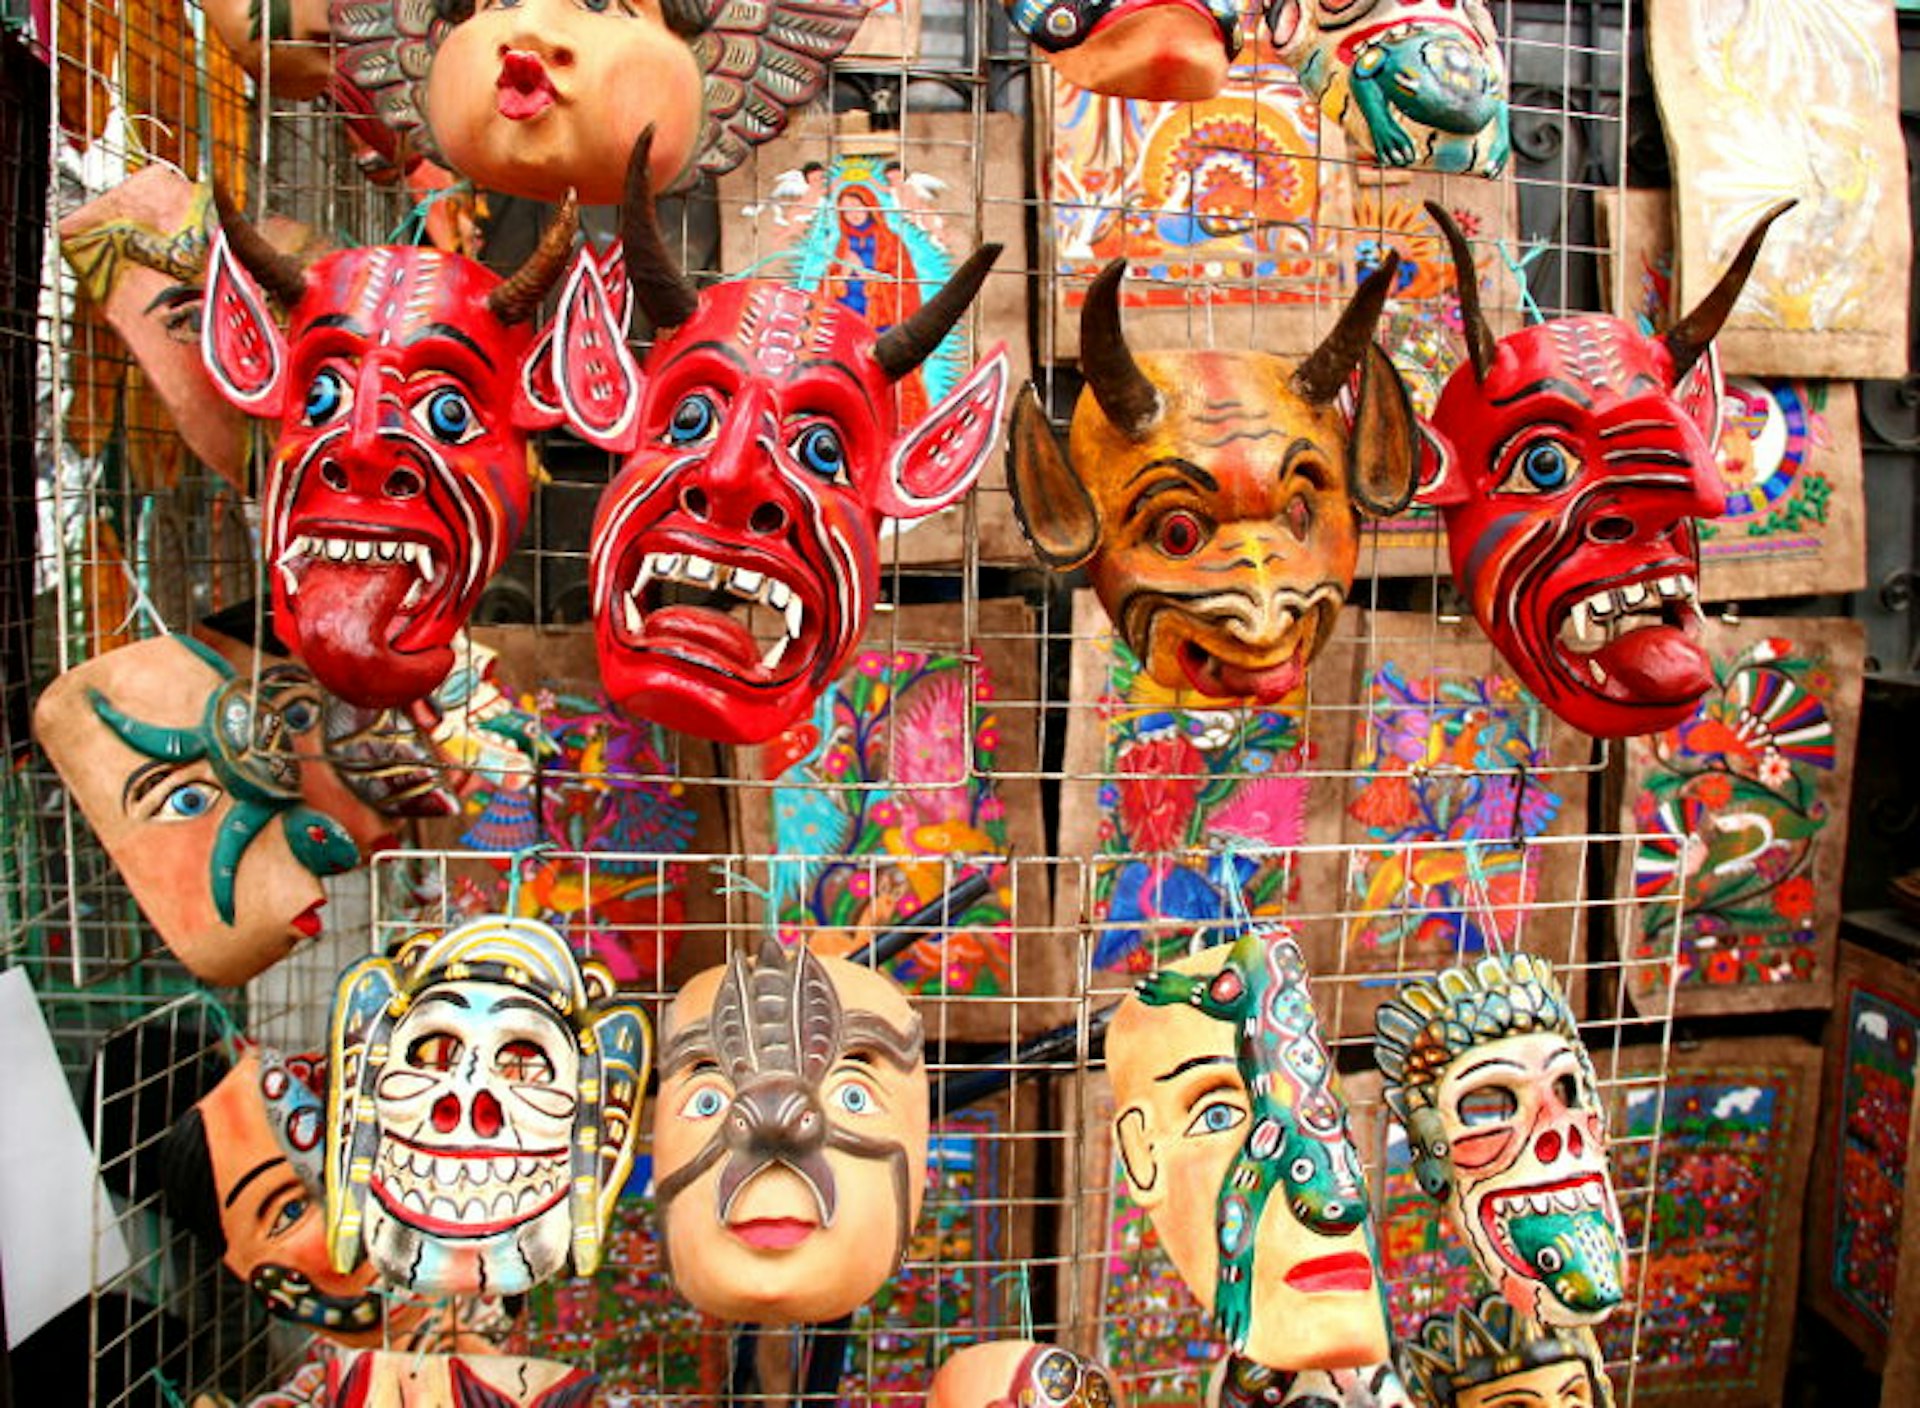 Masks. Image by Phillip Tang / Lonely PLanet